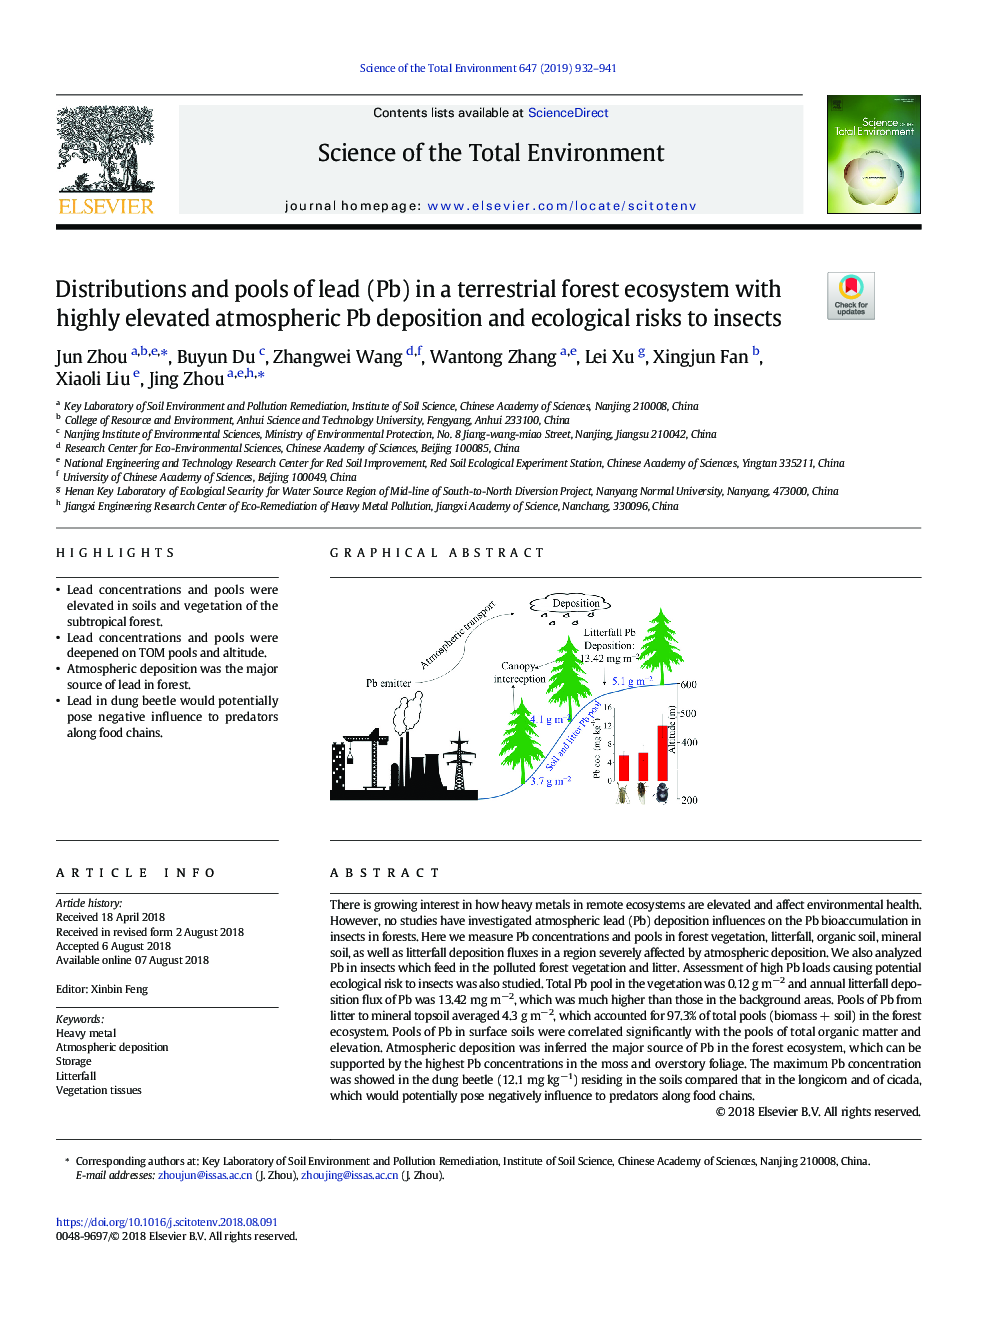 Distributions and pools of lead (Pb) in a terrestrial forest ecosystem with highly elevated atmospheric Pb deposition and ecological risks to insects